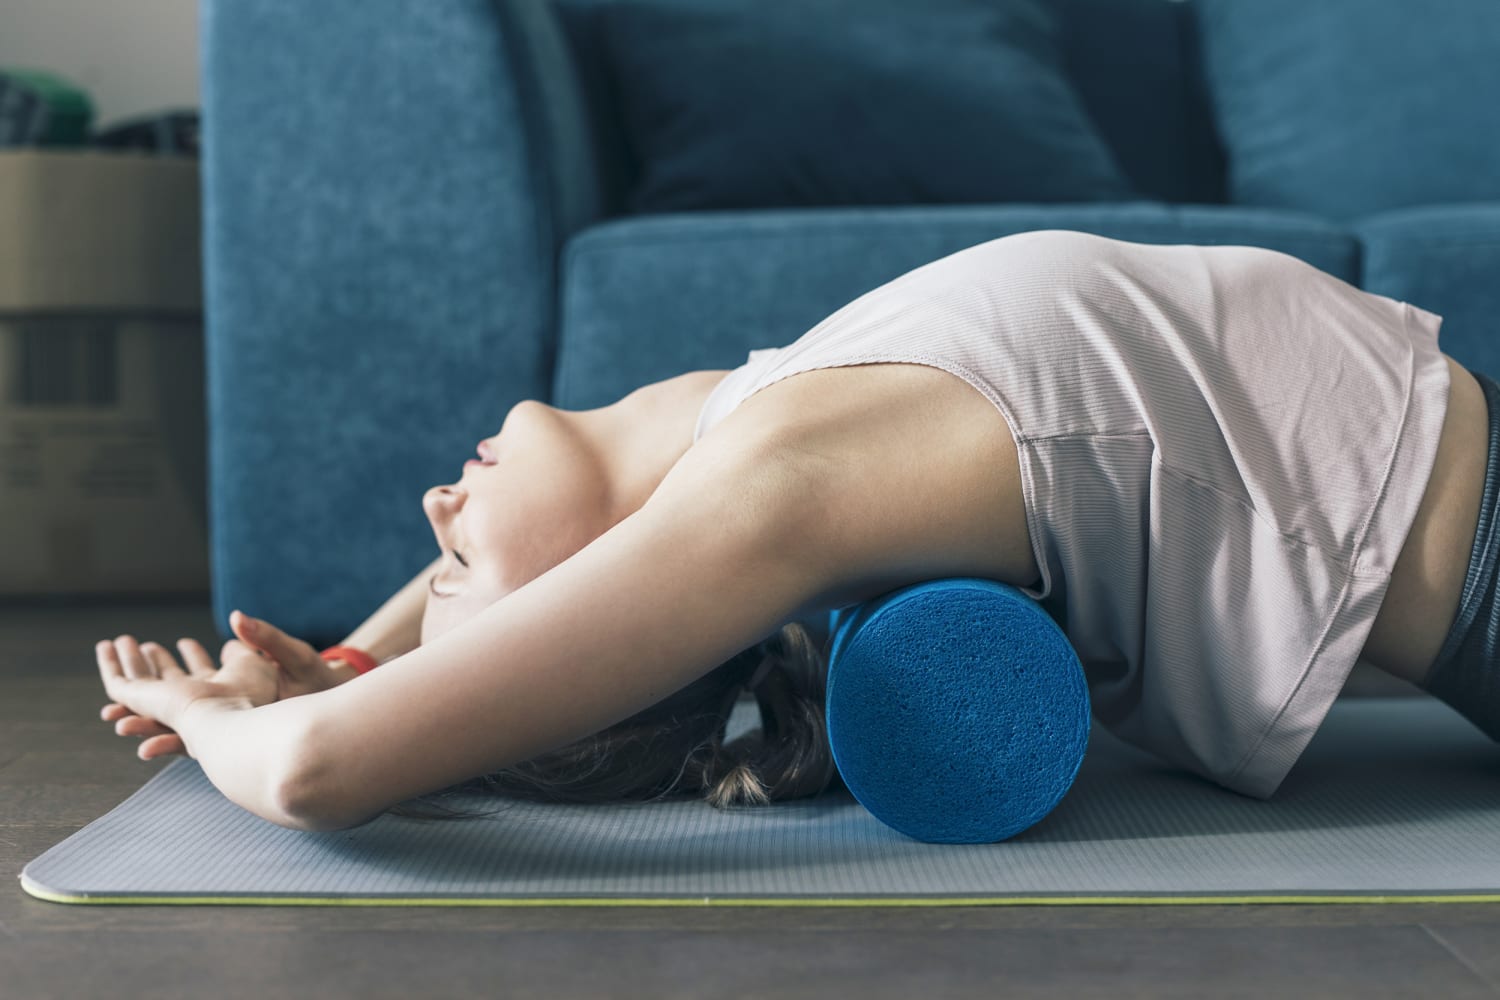 How to Use a Foam Roller for Your Back, IT Band, Calves, and More